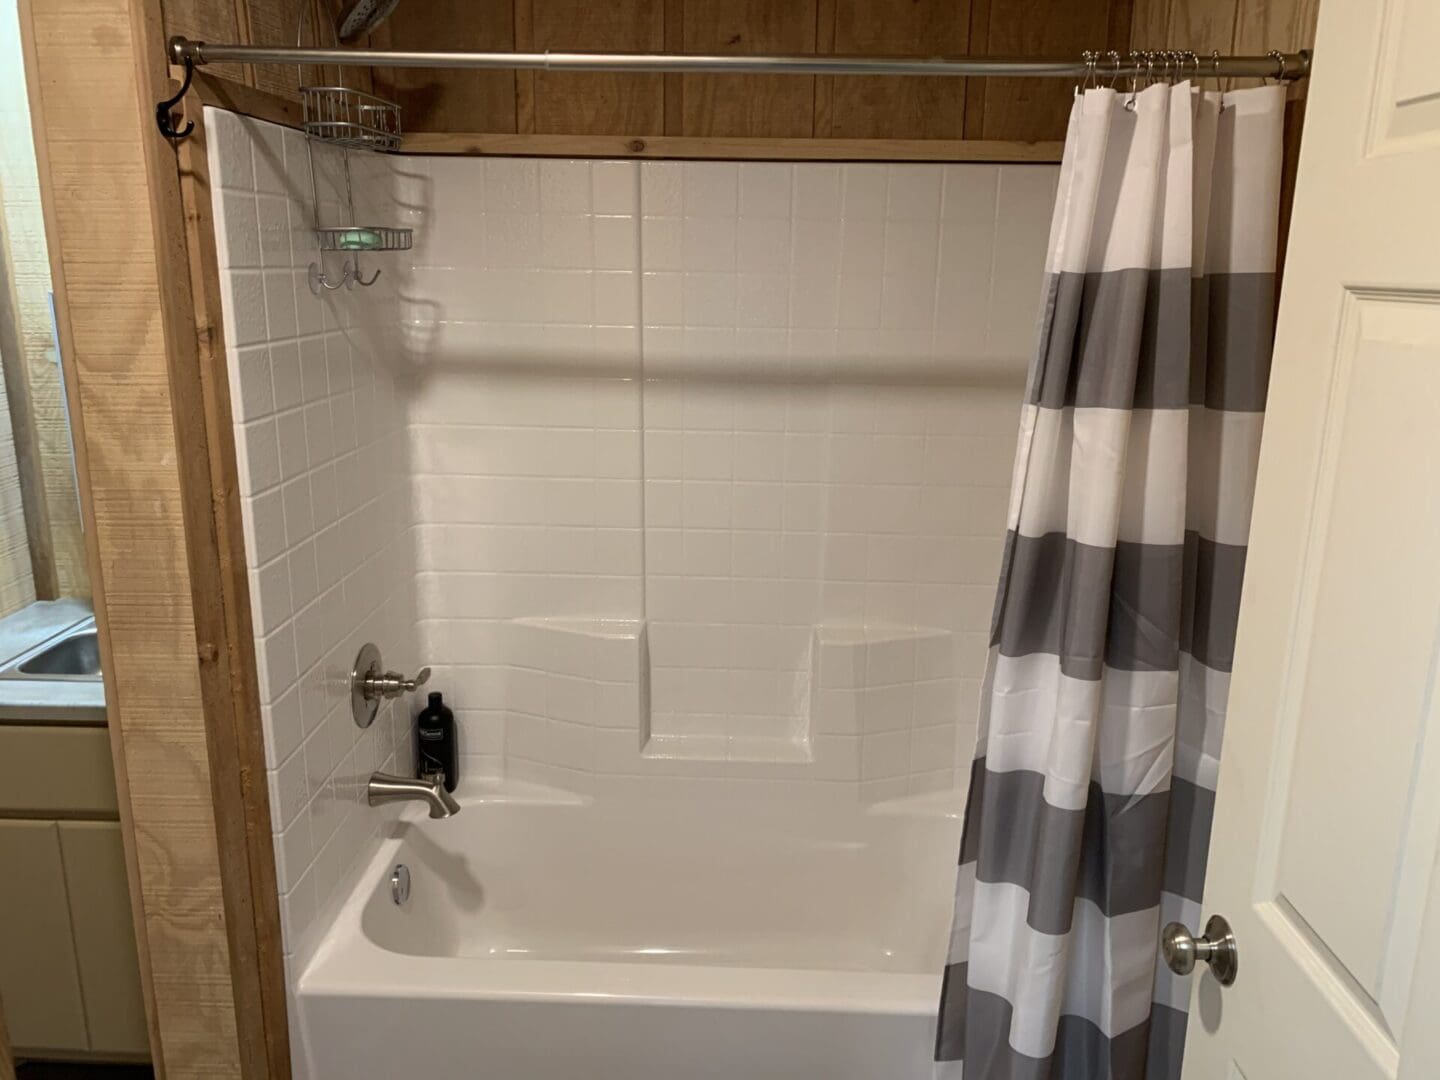 A view of the white tiled bath tub with the curtain